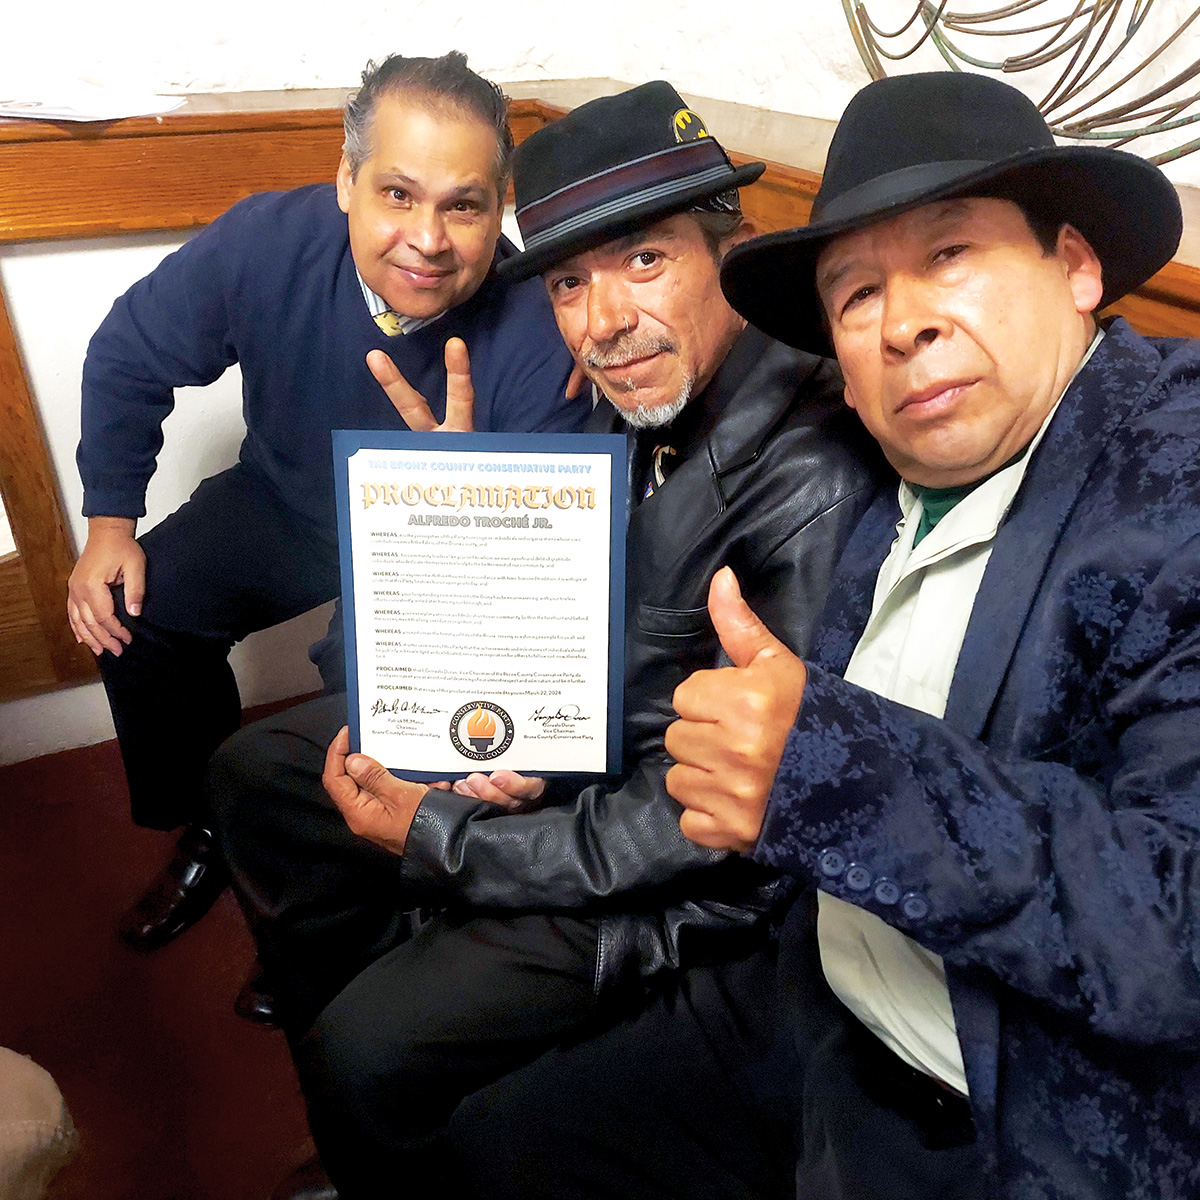 At The Bronx Conservative Party’s monthly meeting are (Left to Right): Belmont resident Joe Padilla, subway hero Alfred Troche holding his proclamation with his friend Jorge Castelan. -Photo by David Greene